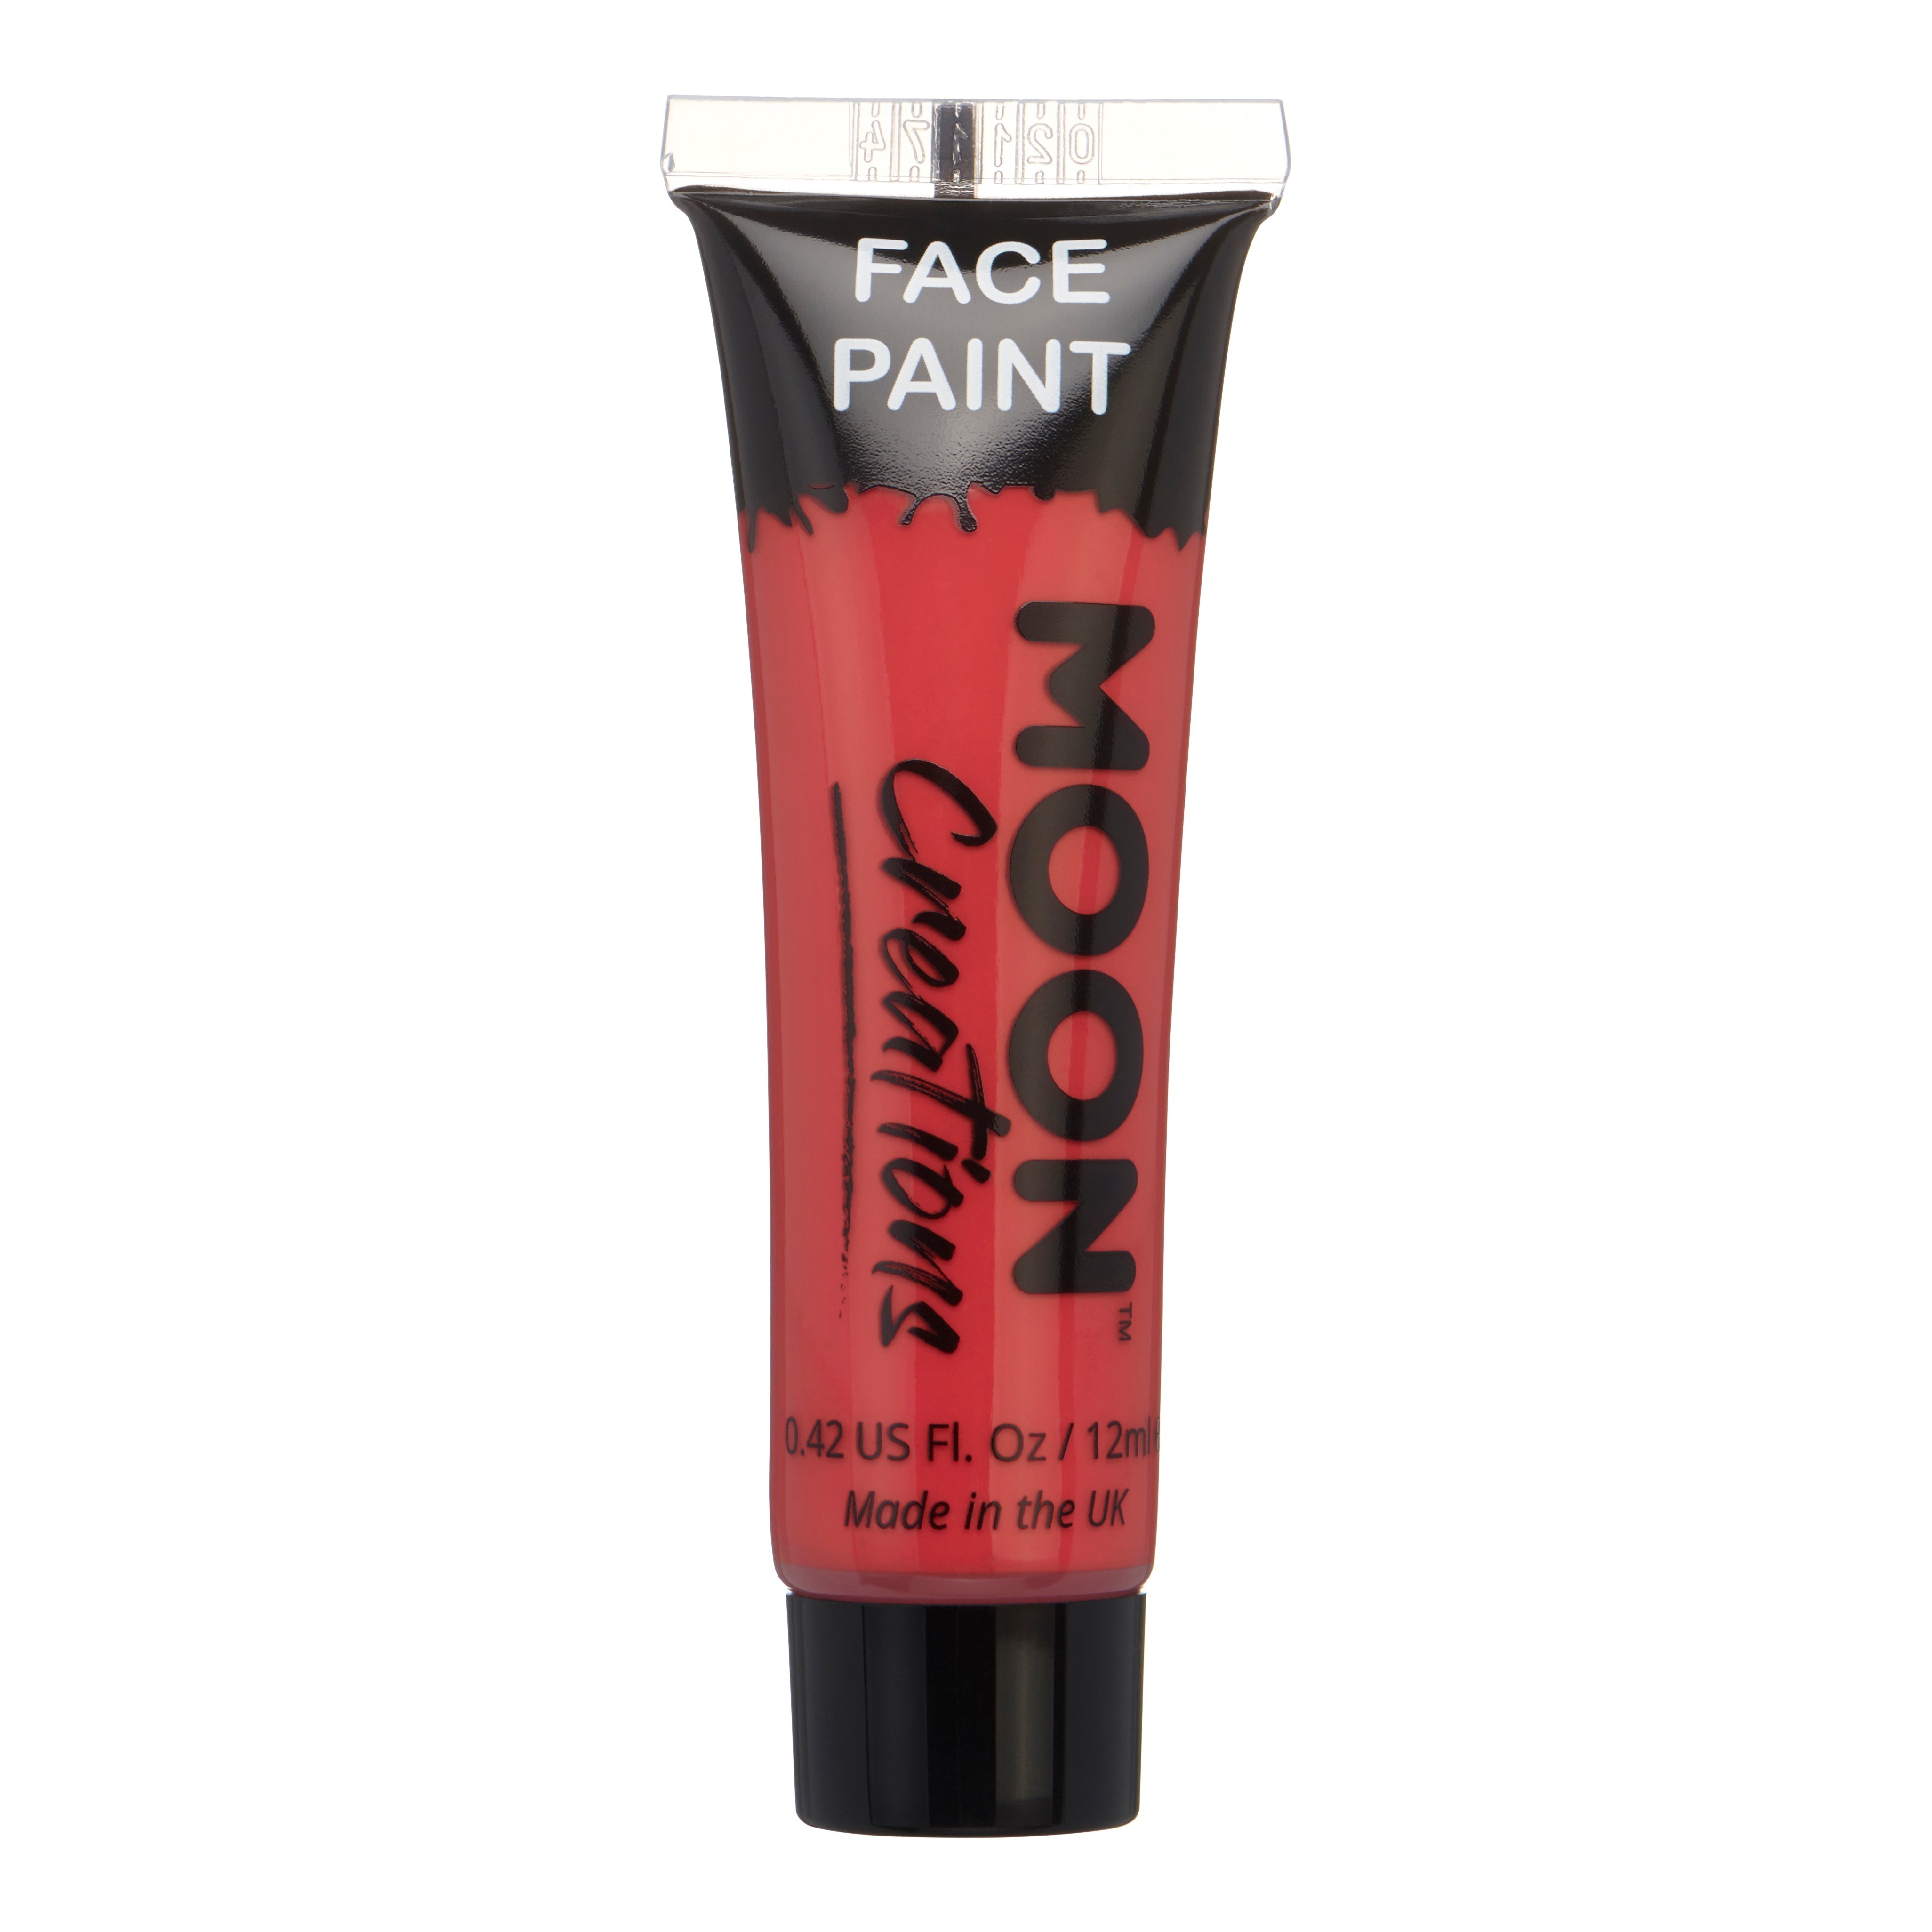 Red - Face & Body Paint Makeup, 12mL. Cosmetically certified, FDA & Health Canada compliant, cruelty free and vegan.